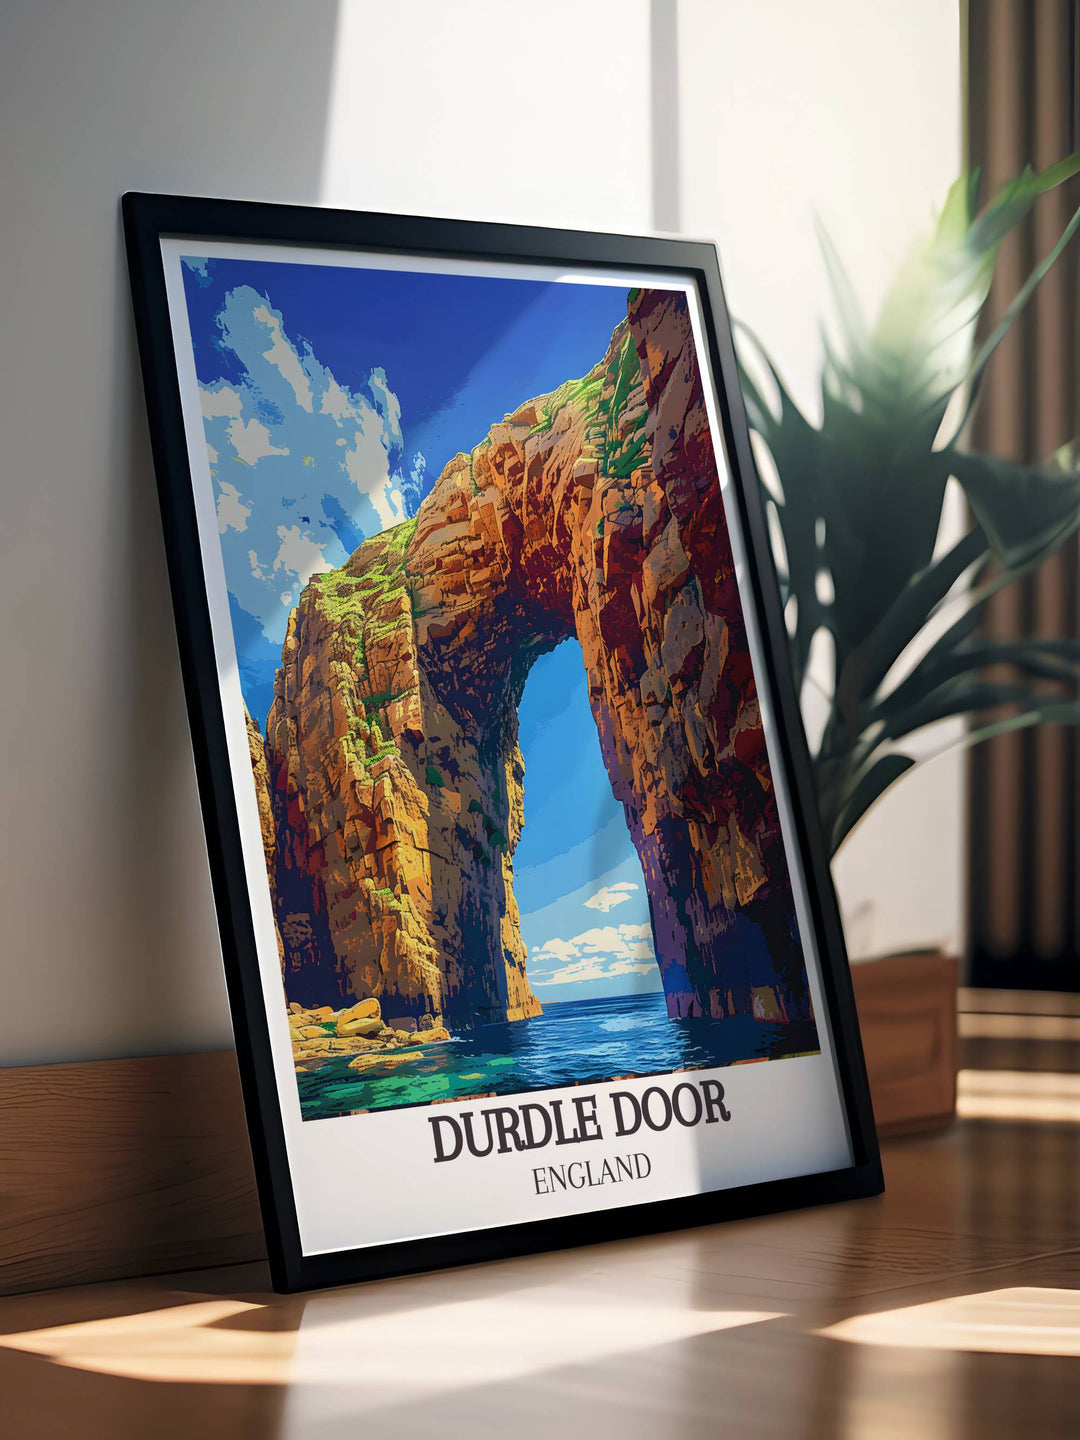 Elegant Durdle Door Arch wall art featuring the iconic limestone arch of Dorset perfect for home decor and travel enthusiasts vibrant and detailed photography capturing the natural beauty of this renowned coastal landmark ideal for gifts and interior design.